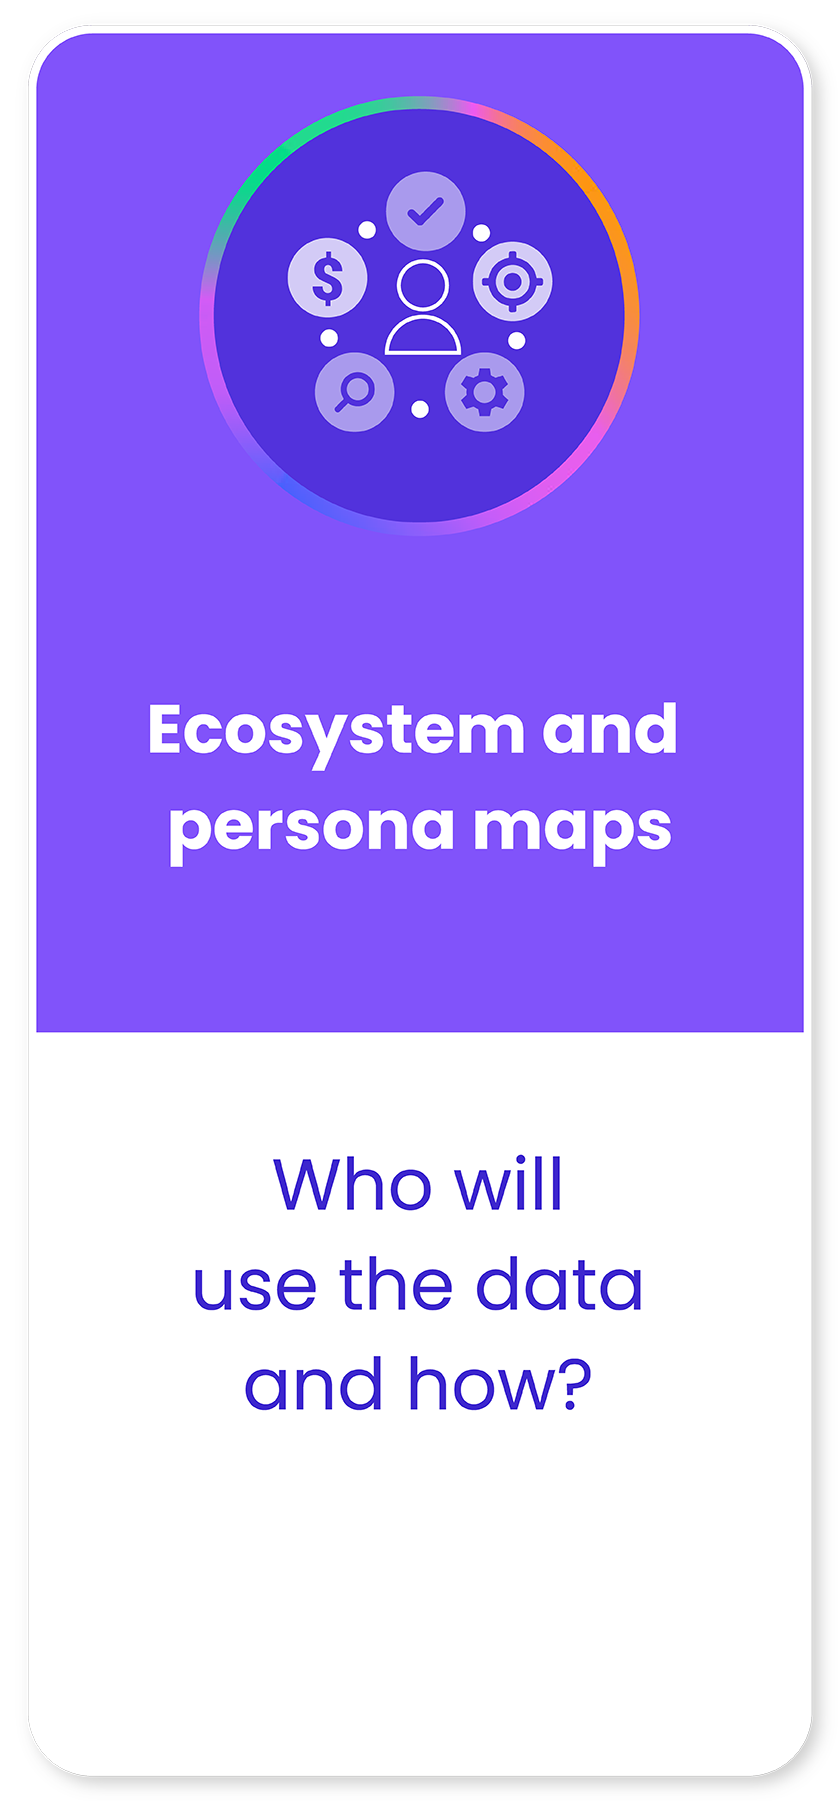 Ecosystem_and_persona_maps_component_b68a7ba6fd.png